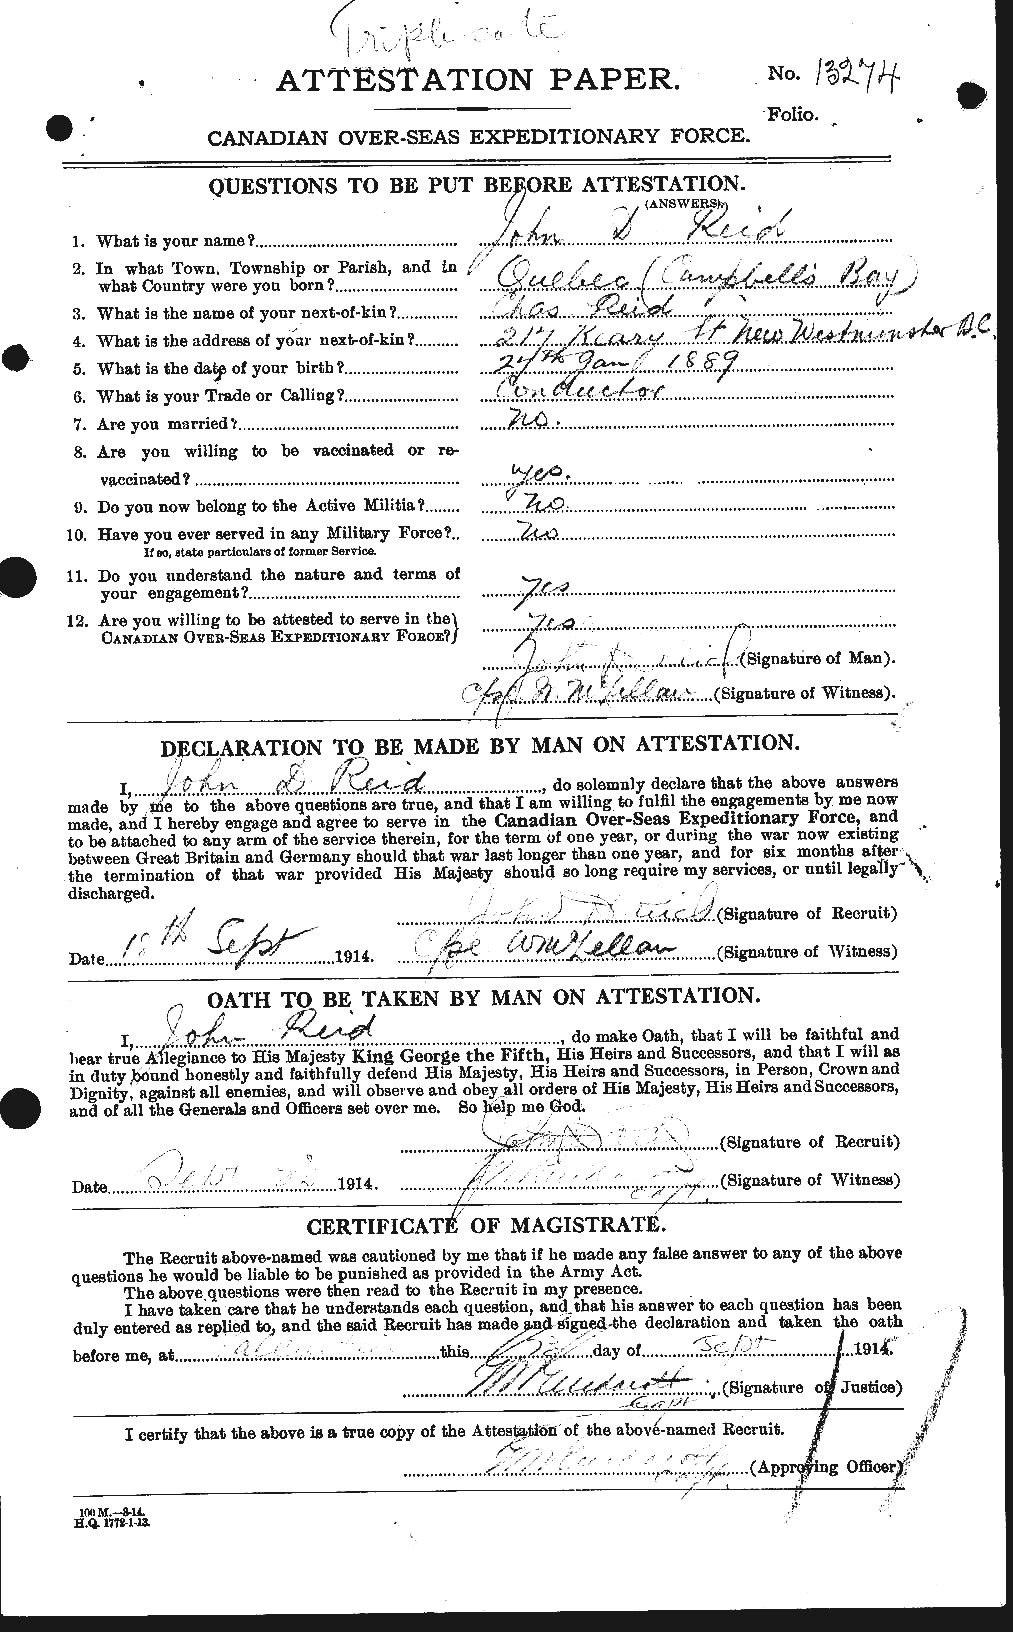 Personnel Records of the First World War - CEF 598829a